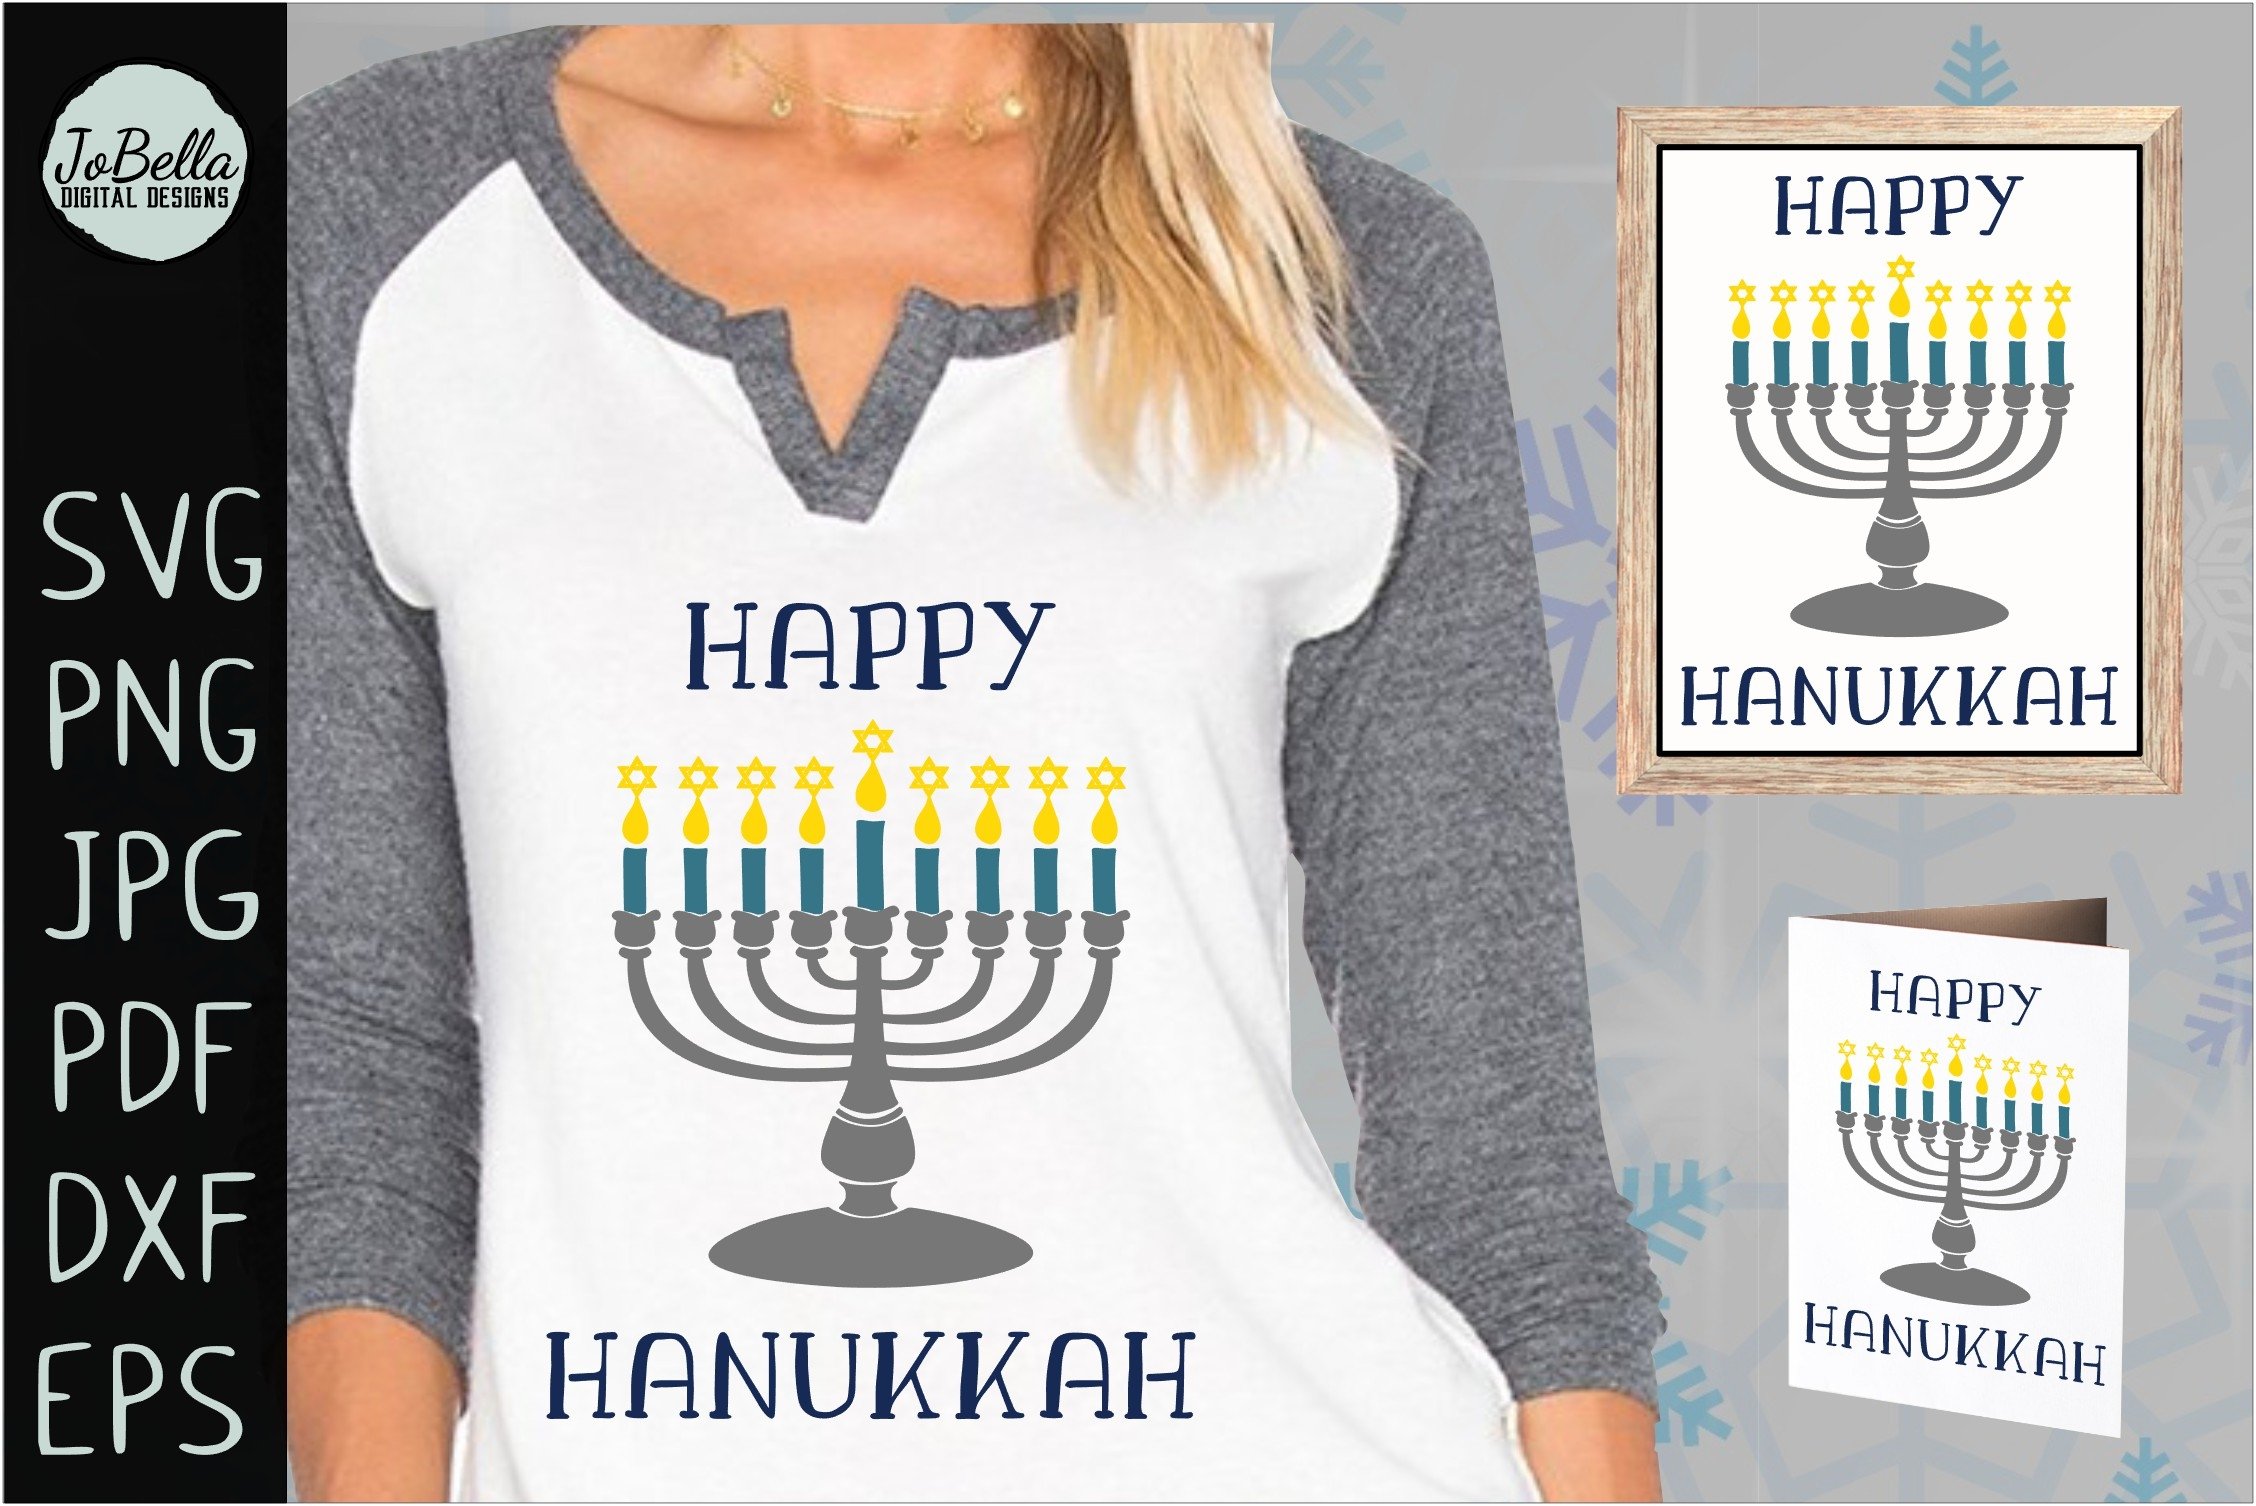 Shirt with the lettering "Happy Hanukkah" and image candlestick on woman.